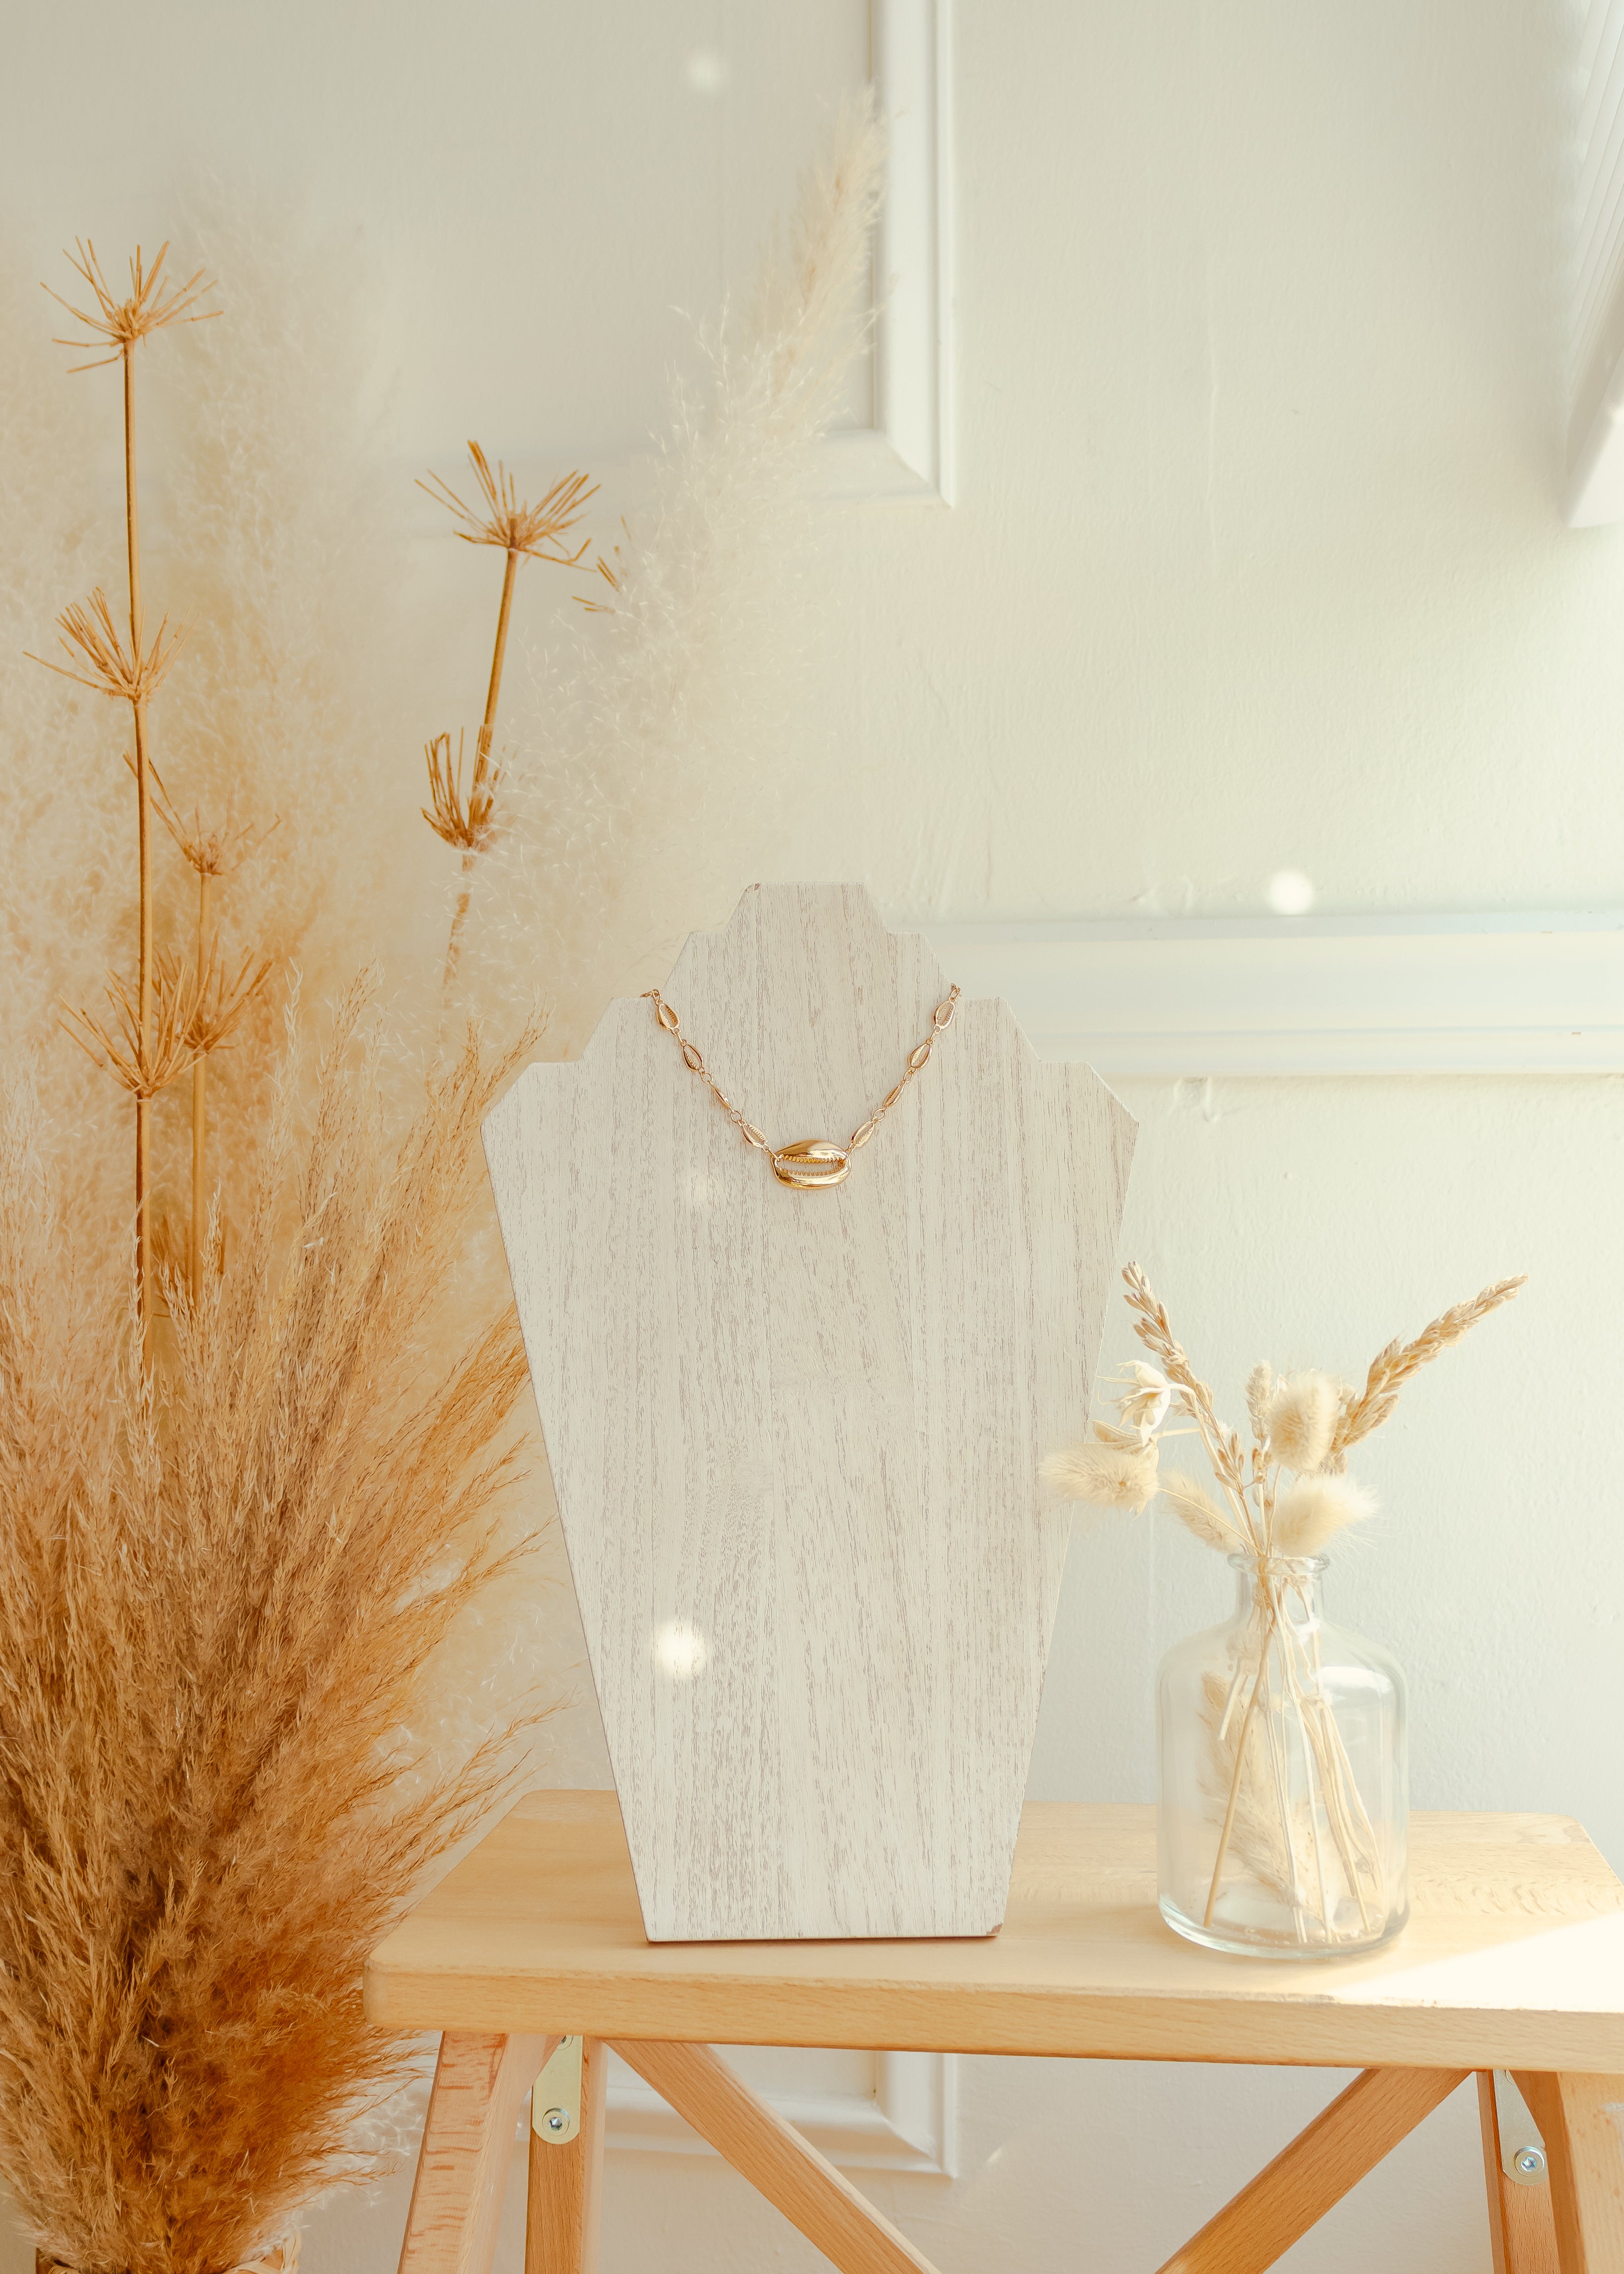 Island Gal Gold Shell Necklace